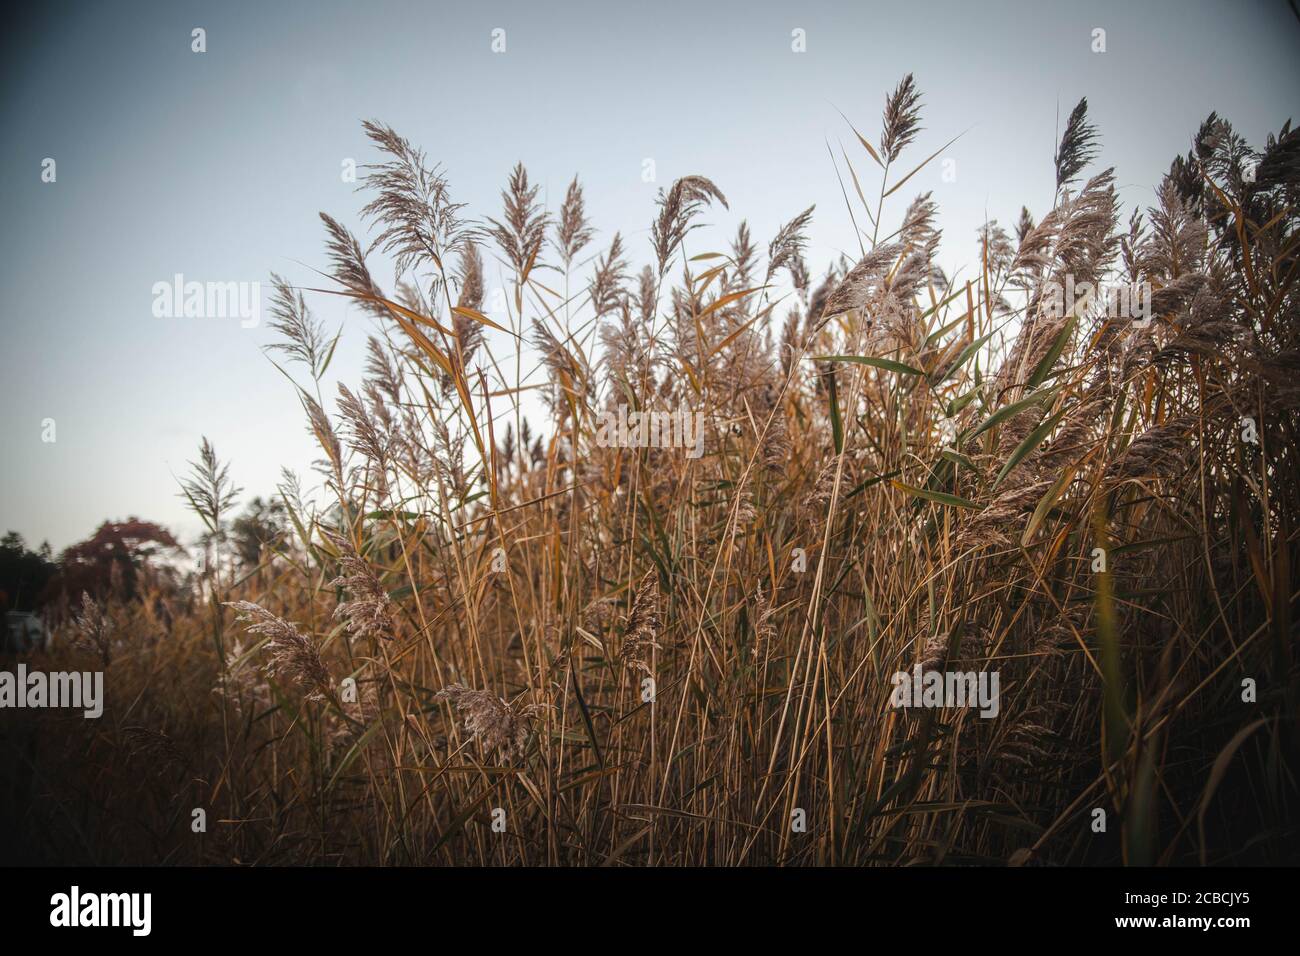 The bunch of phragmites or common reed at dusk in Branford, Connecticut. Stock Photo